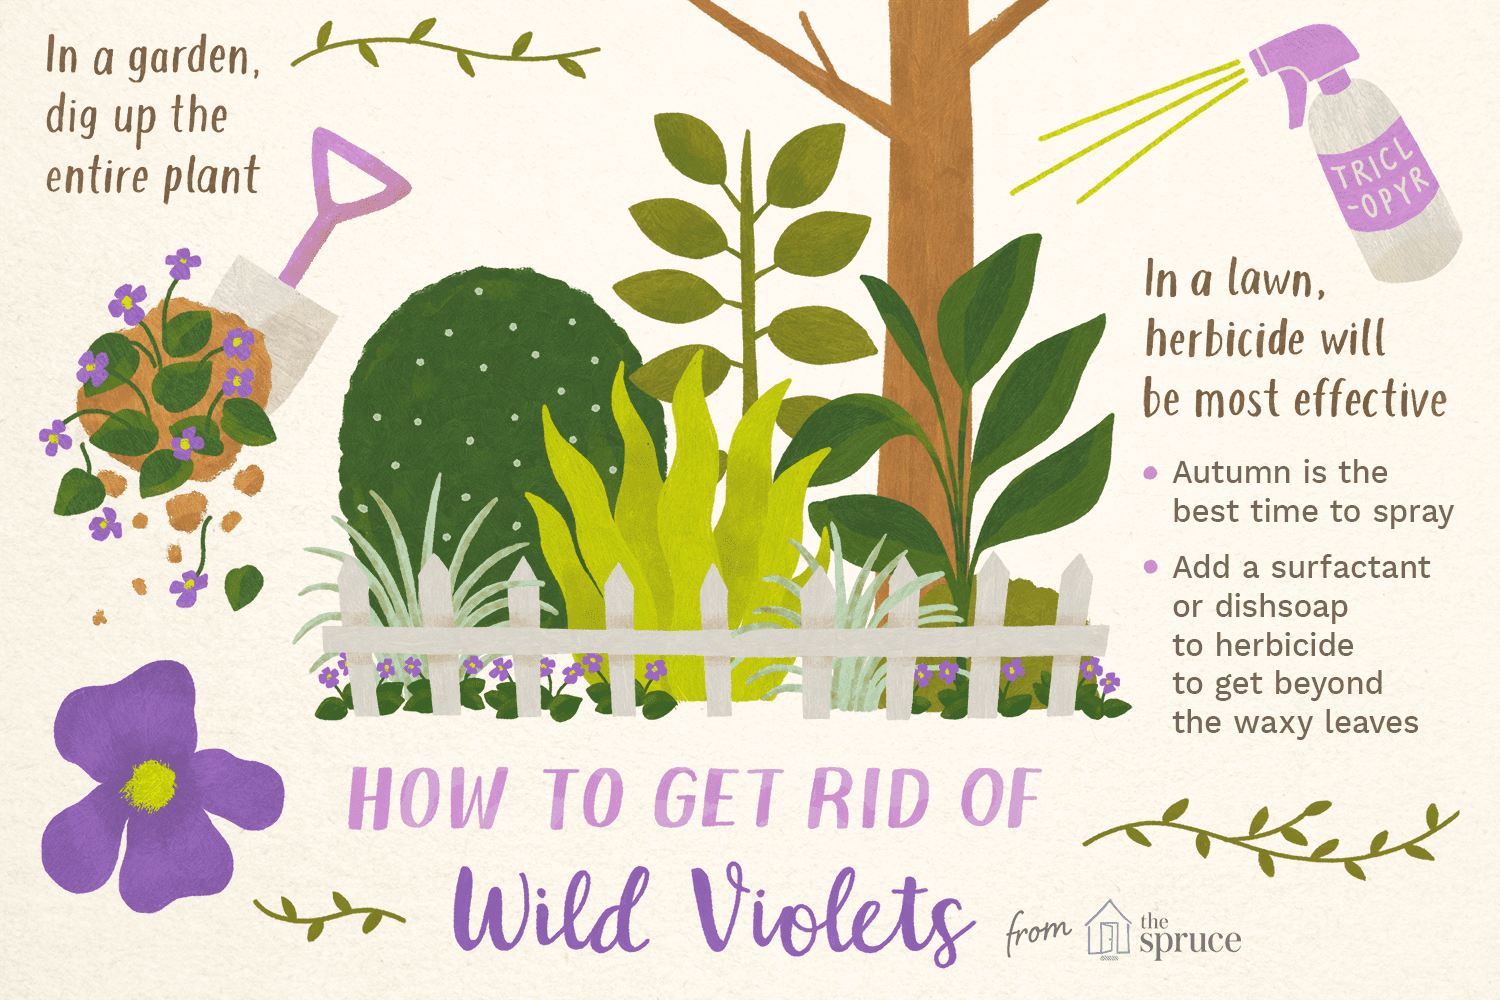 How to Get Rid of Wild Violets in the Lawn